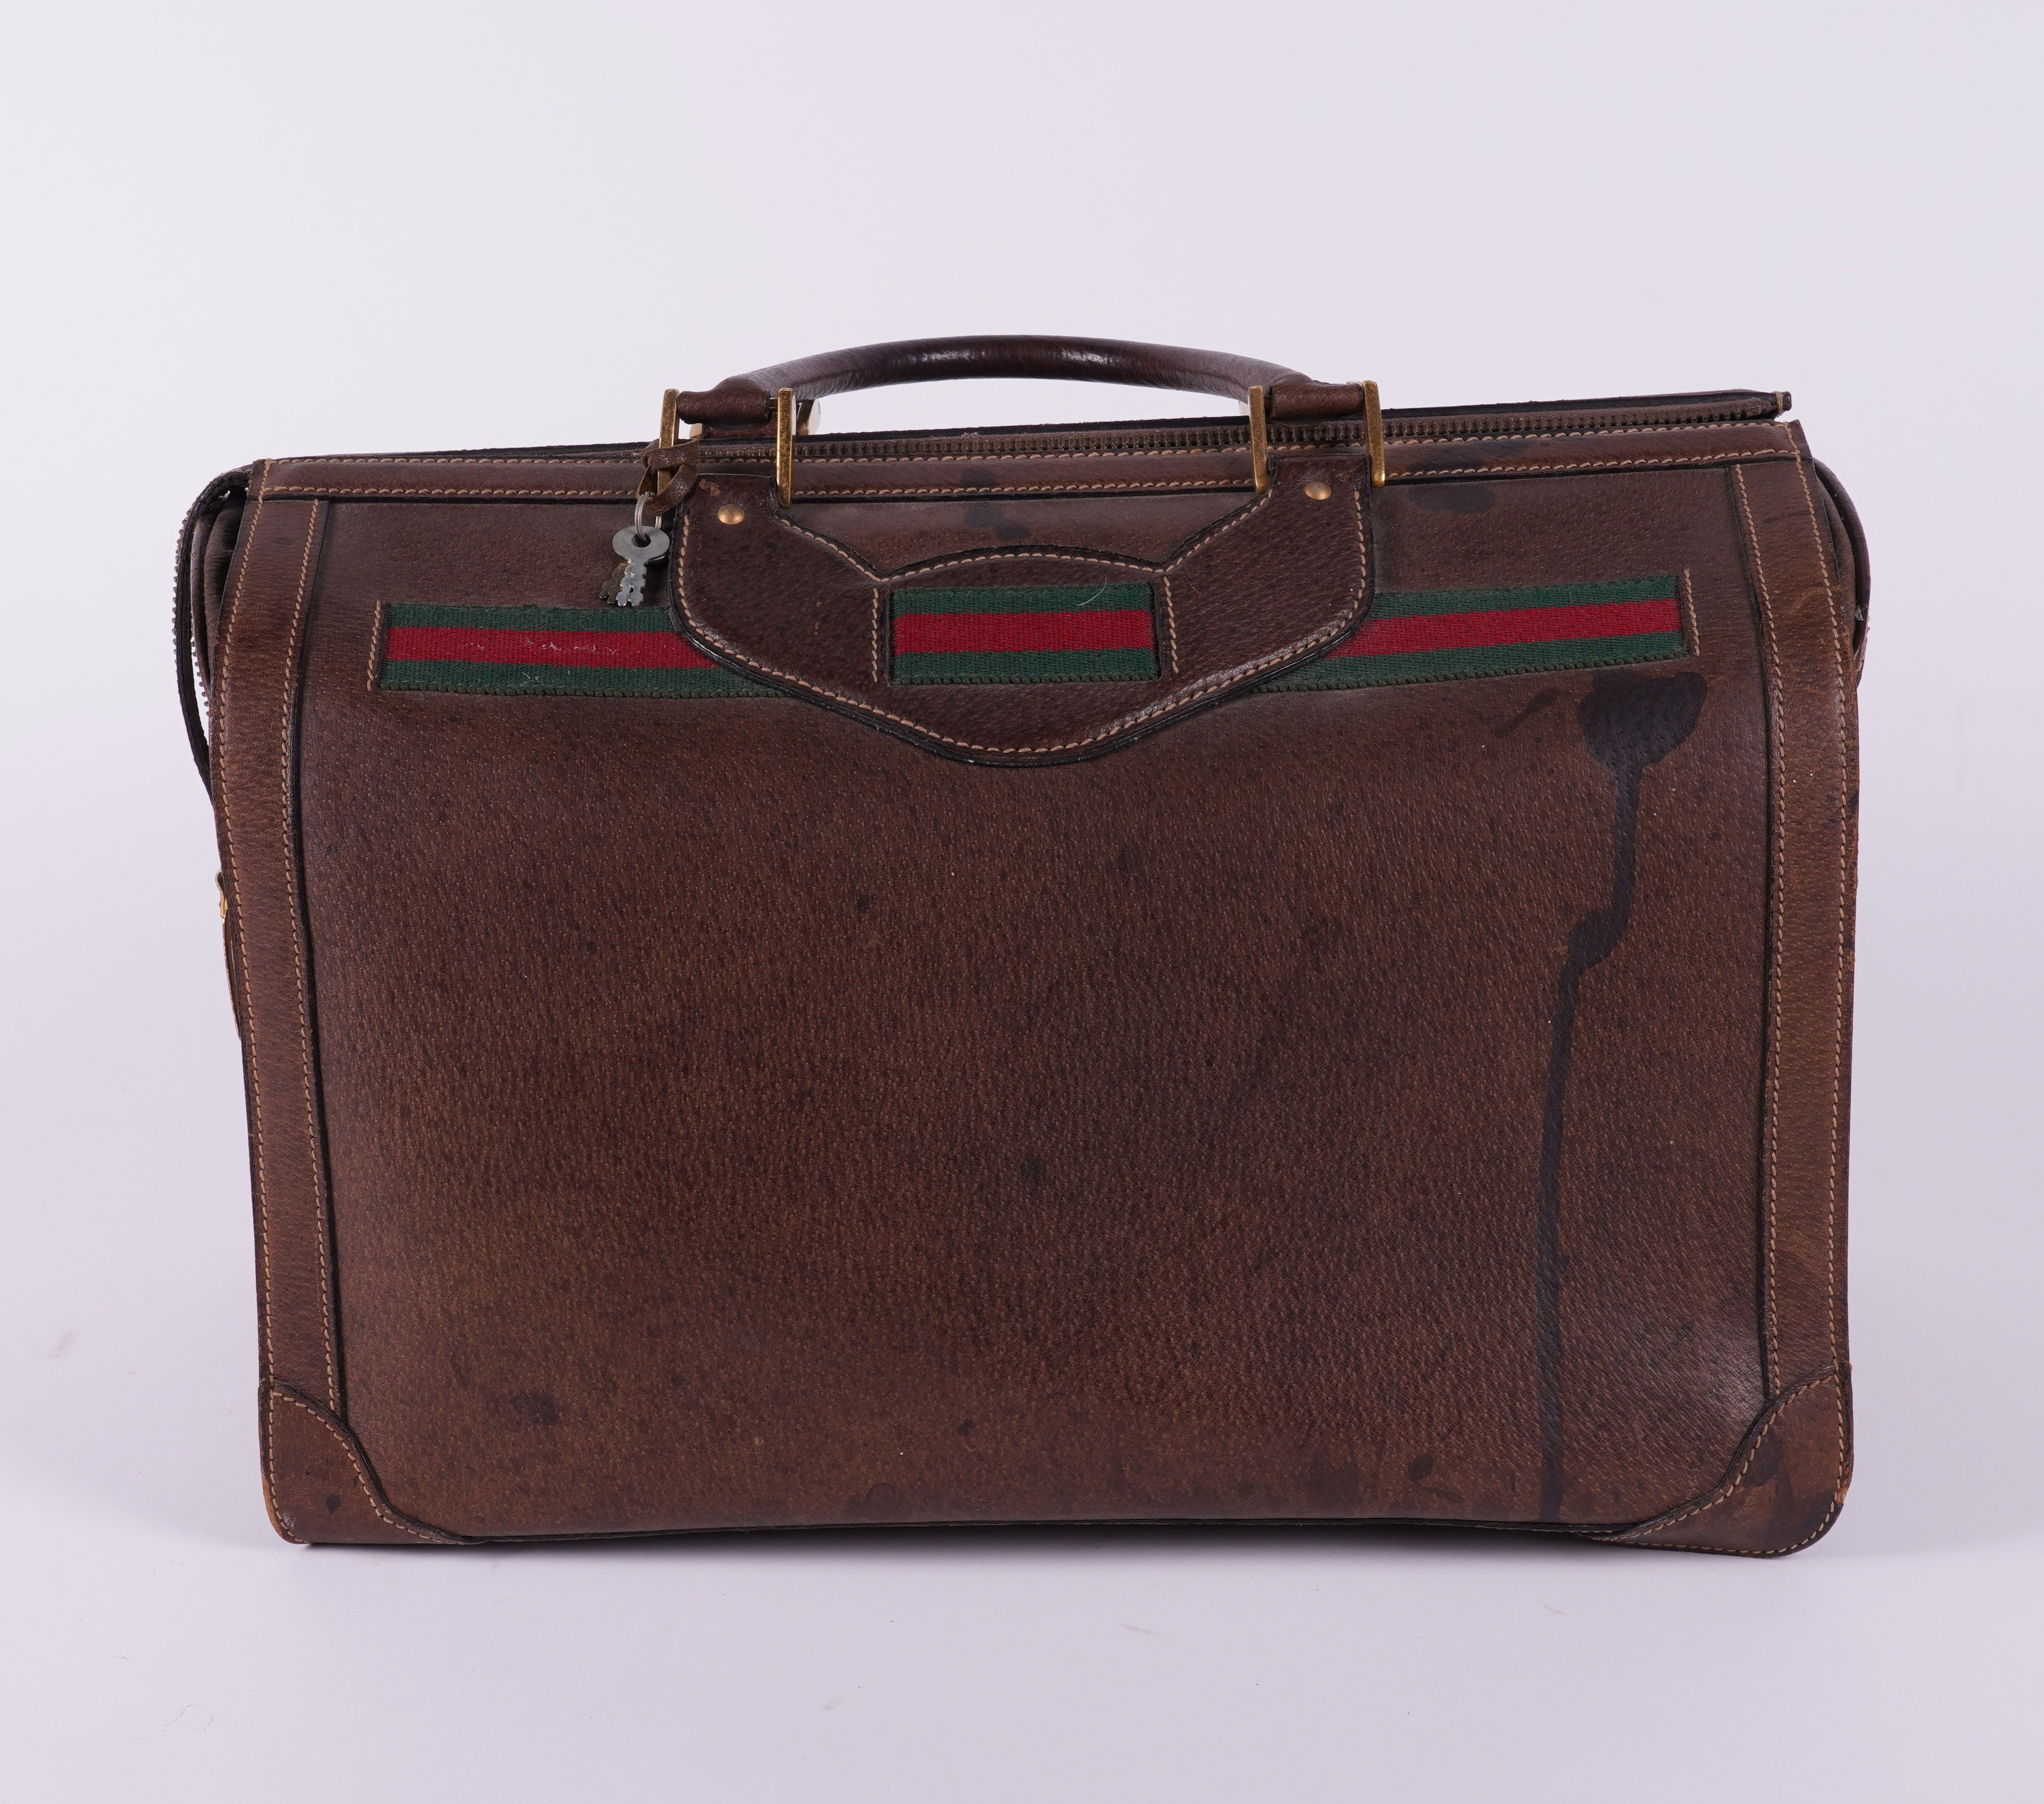 GUCCI: A BROWN LEATHER HOLDALL - Image 3 of 6